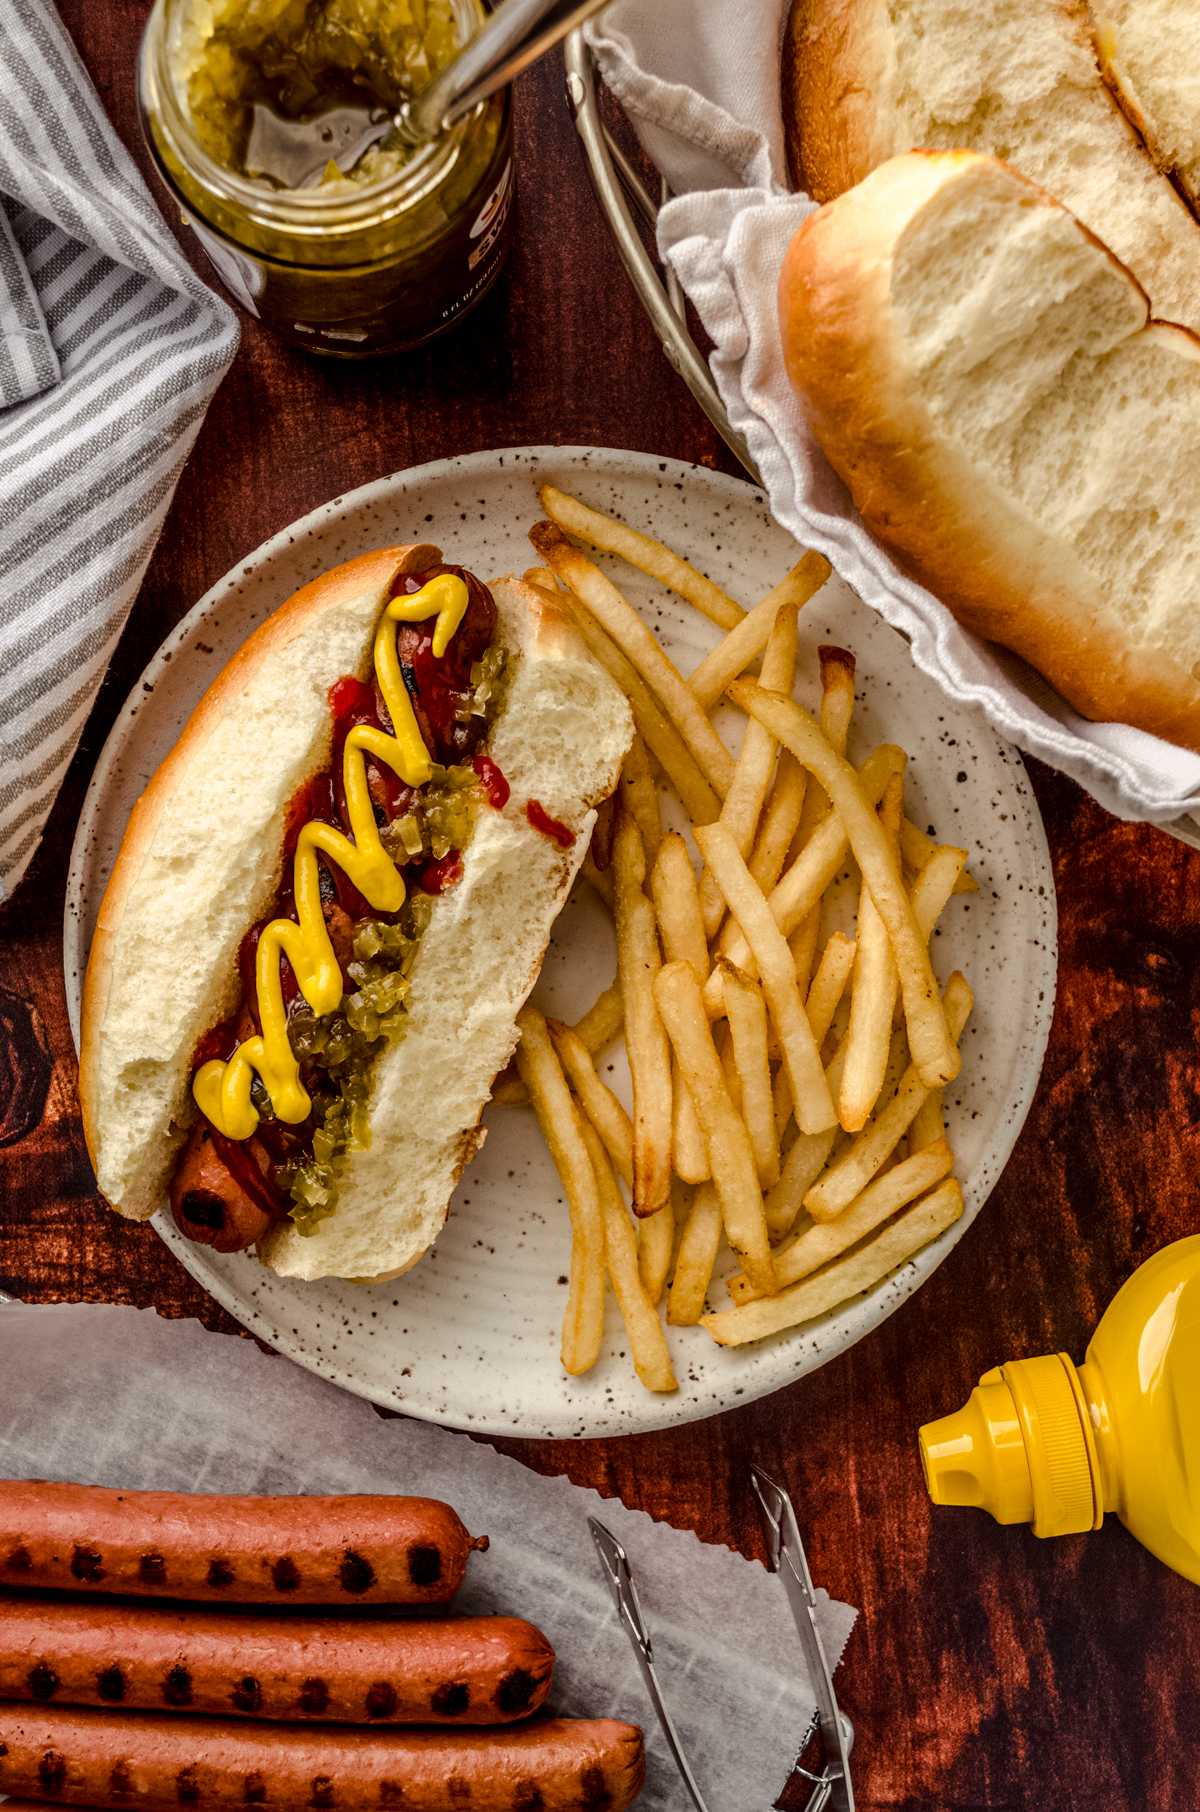 Aerial photo of a hot dog and fries on a plate.